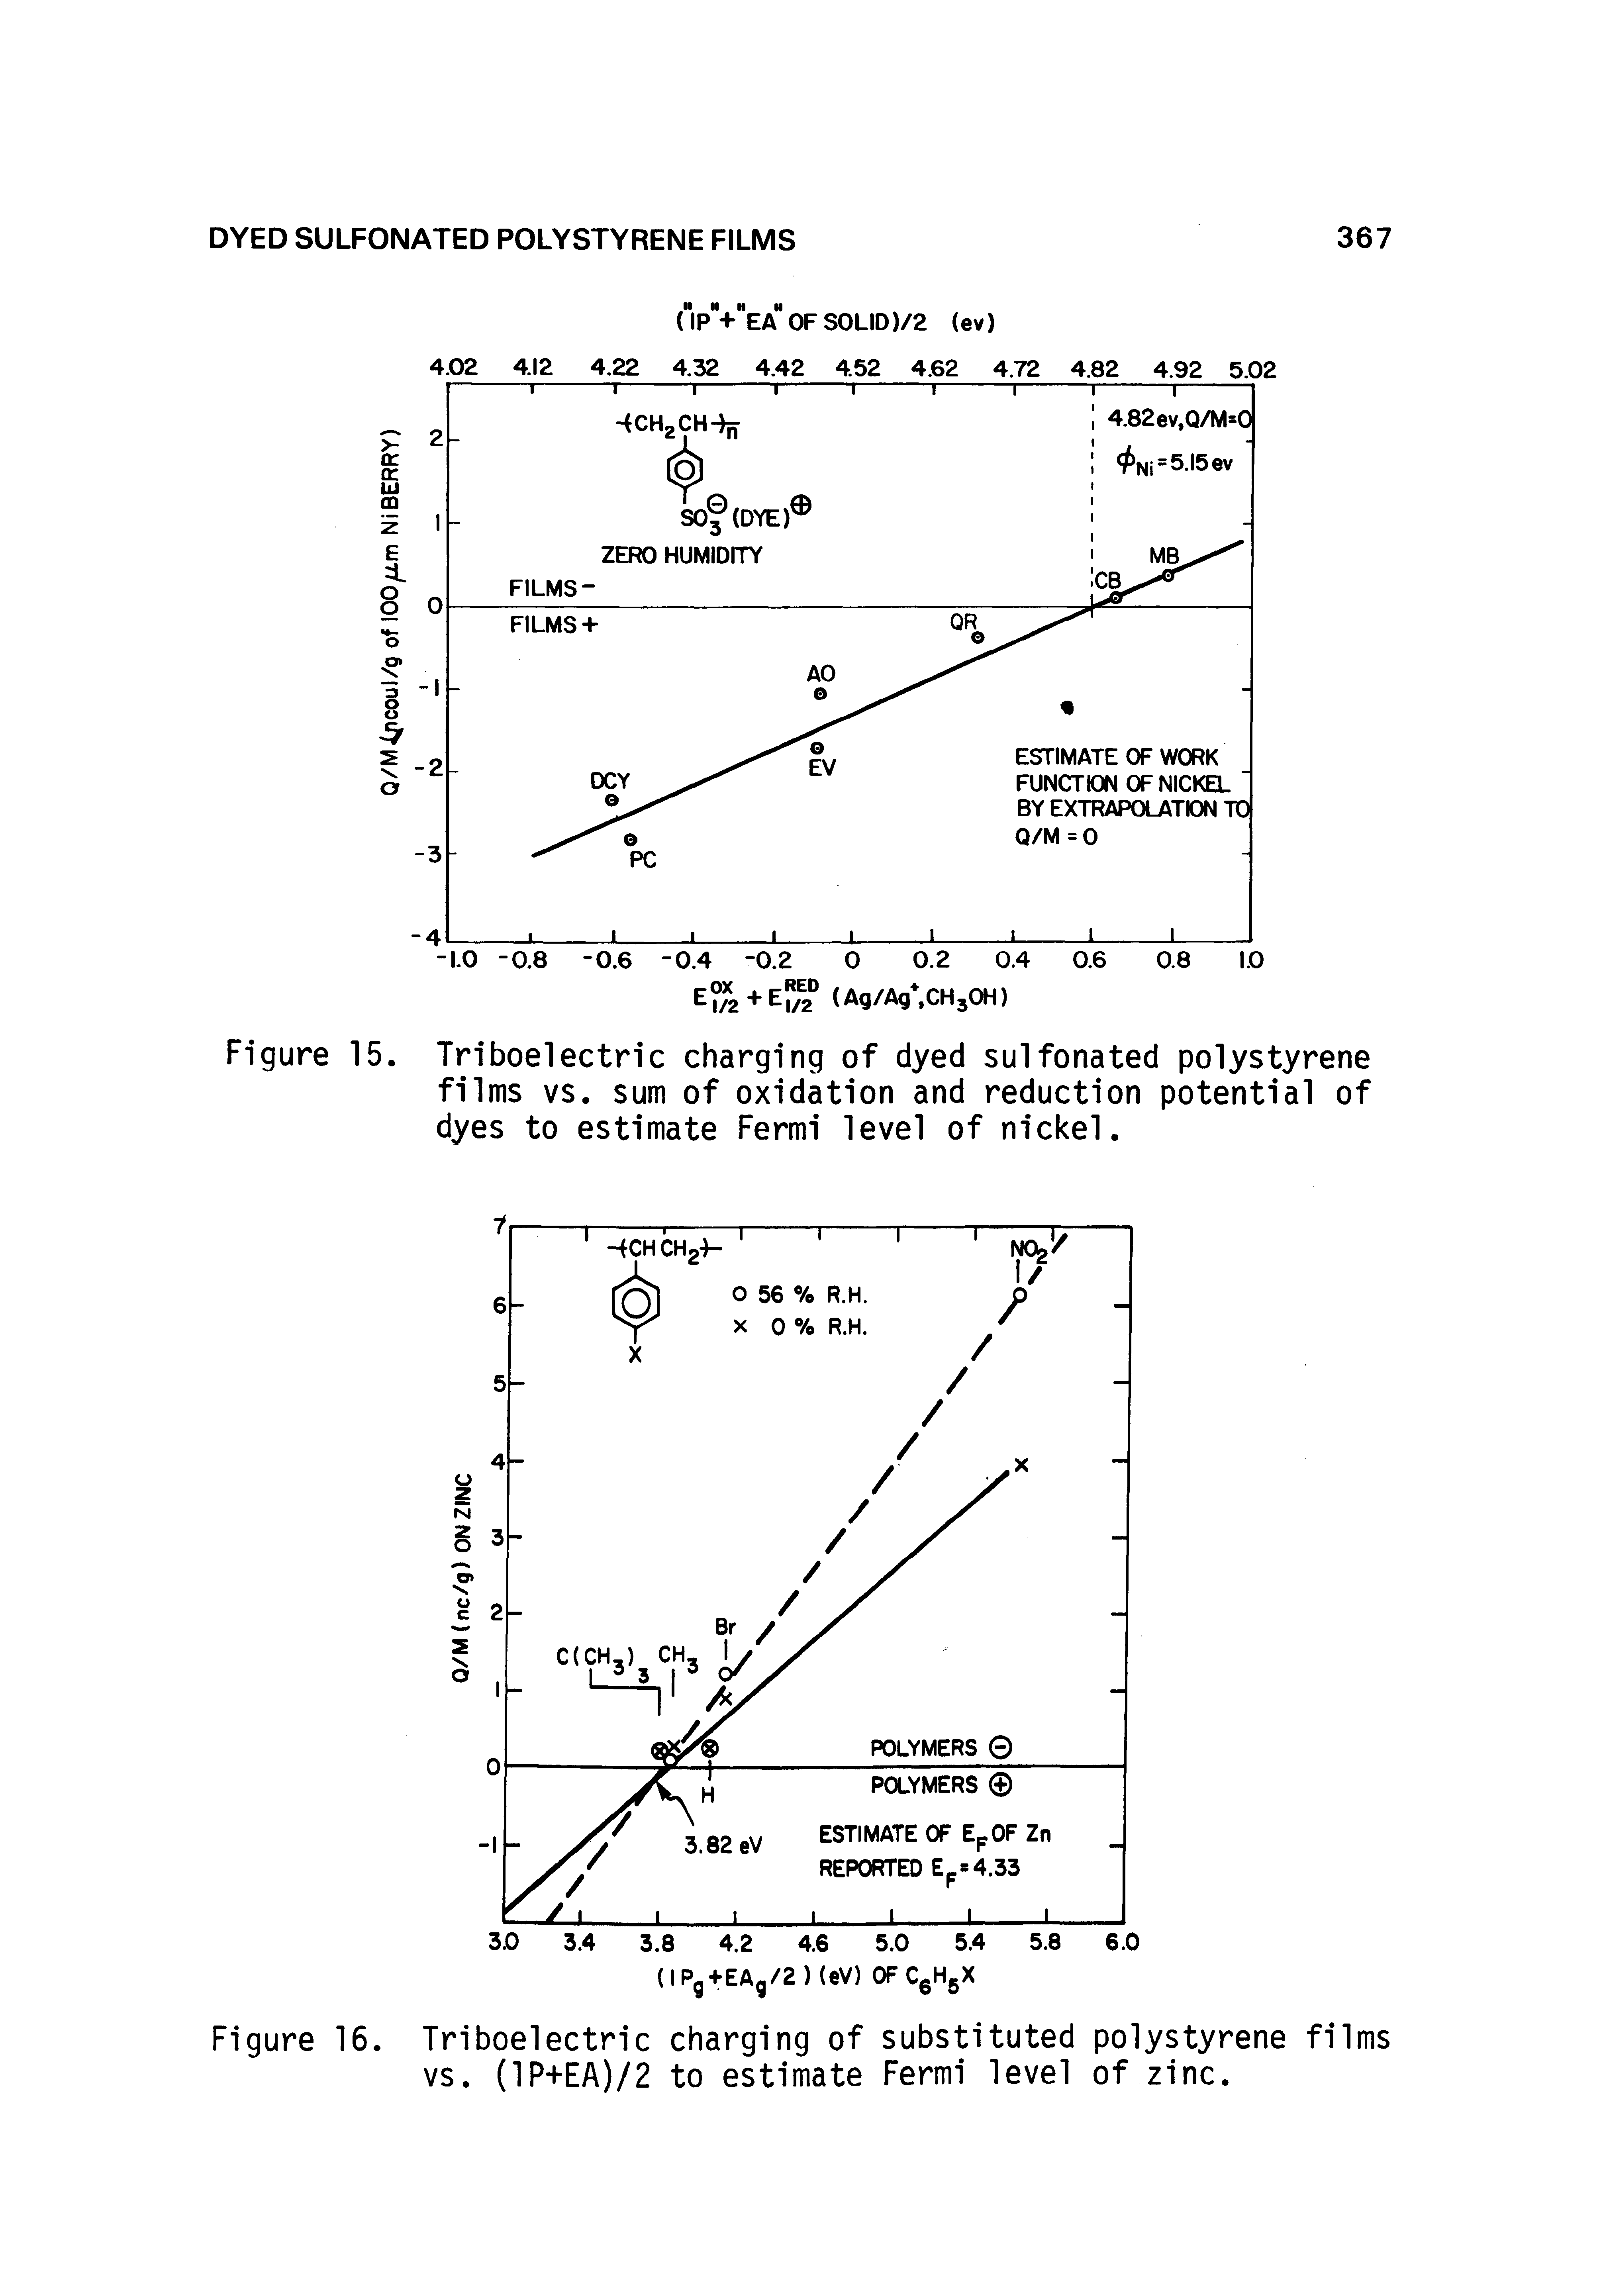 Figure 15. Triboelectric charging of dyed sulfonated polystyrene films vs. sum of oxidation and reduction potential of dyes to estimate Fermi level of nickel.